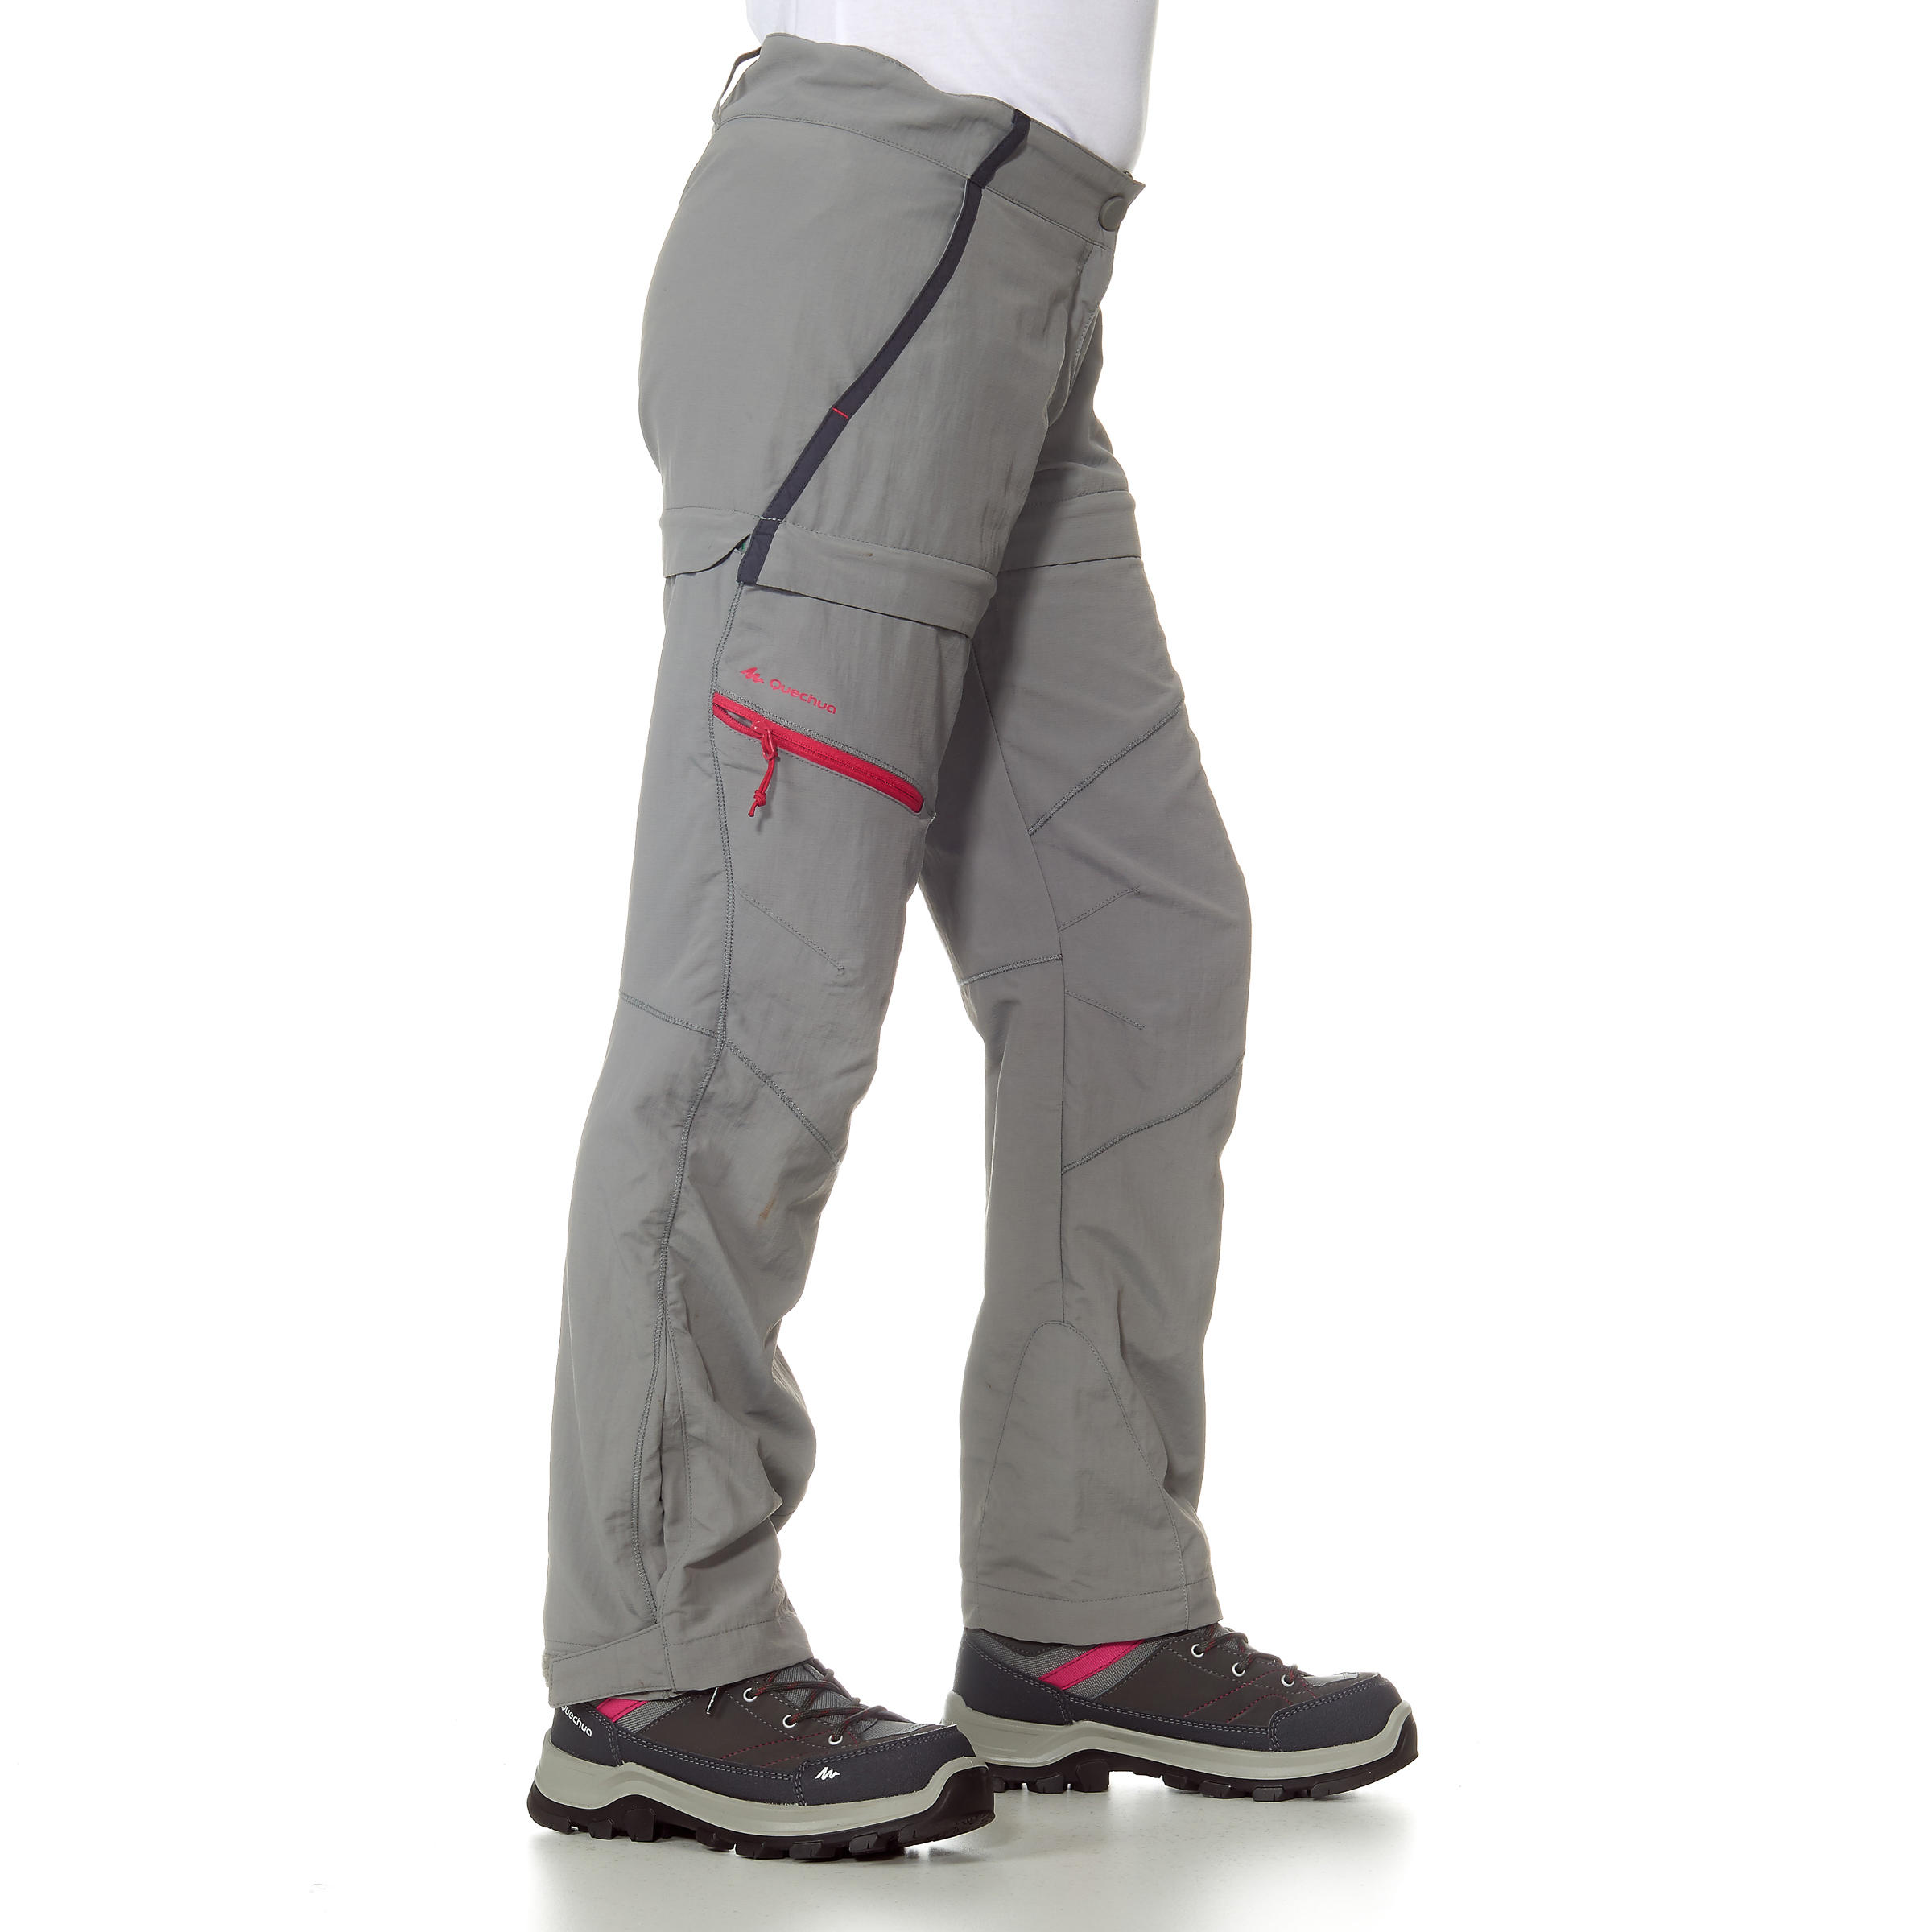 Womens Mountain Hiking Trousers MH100 By Decathlon